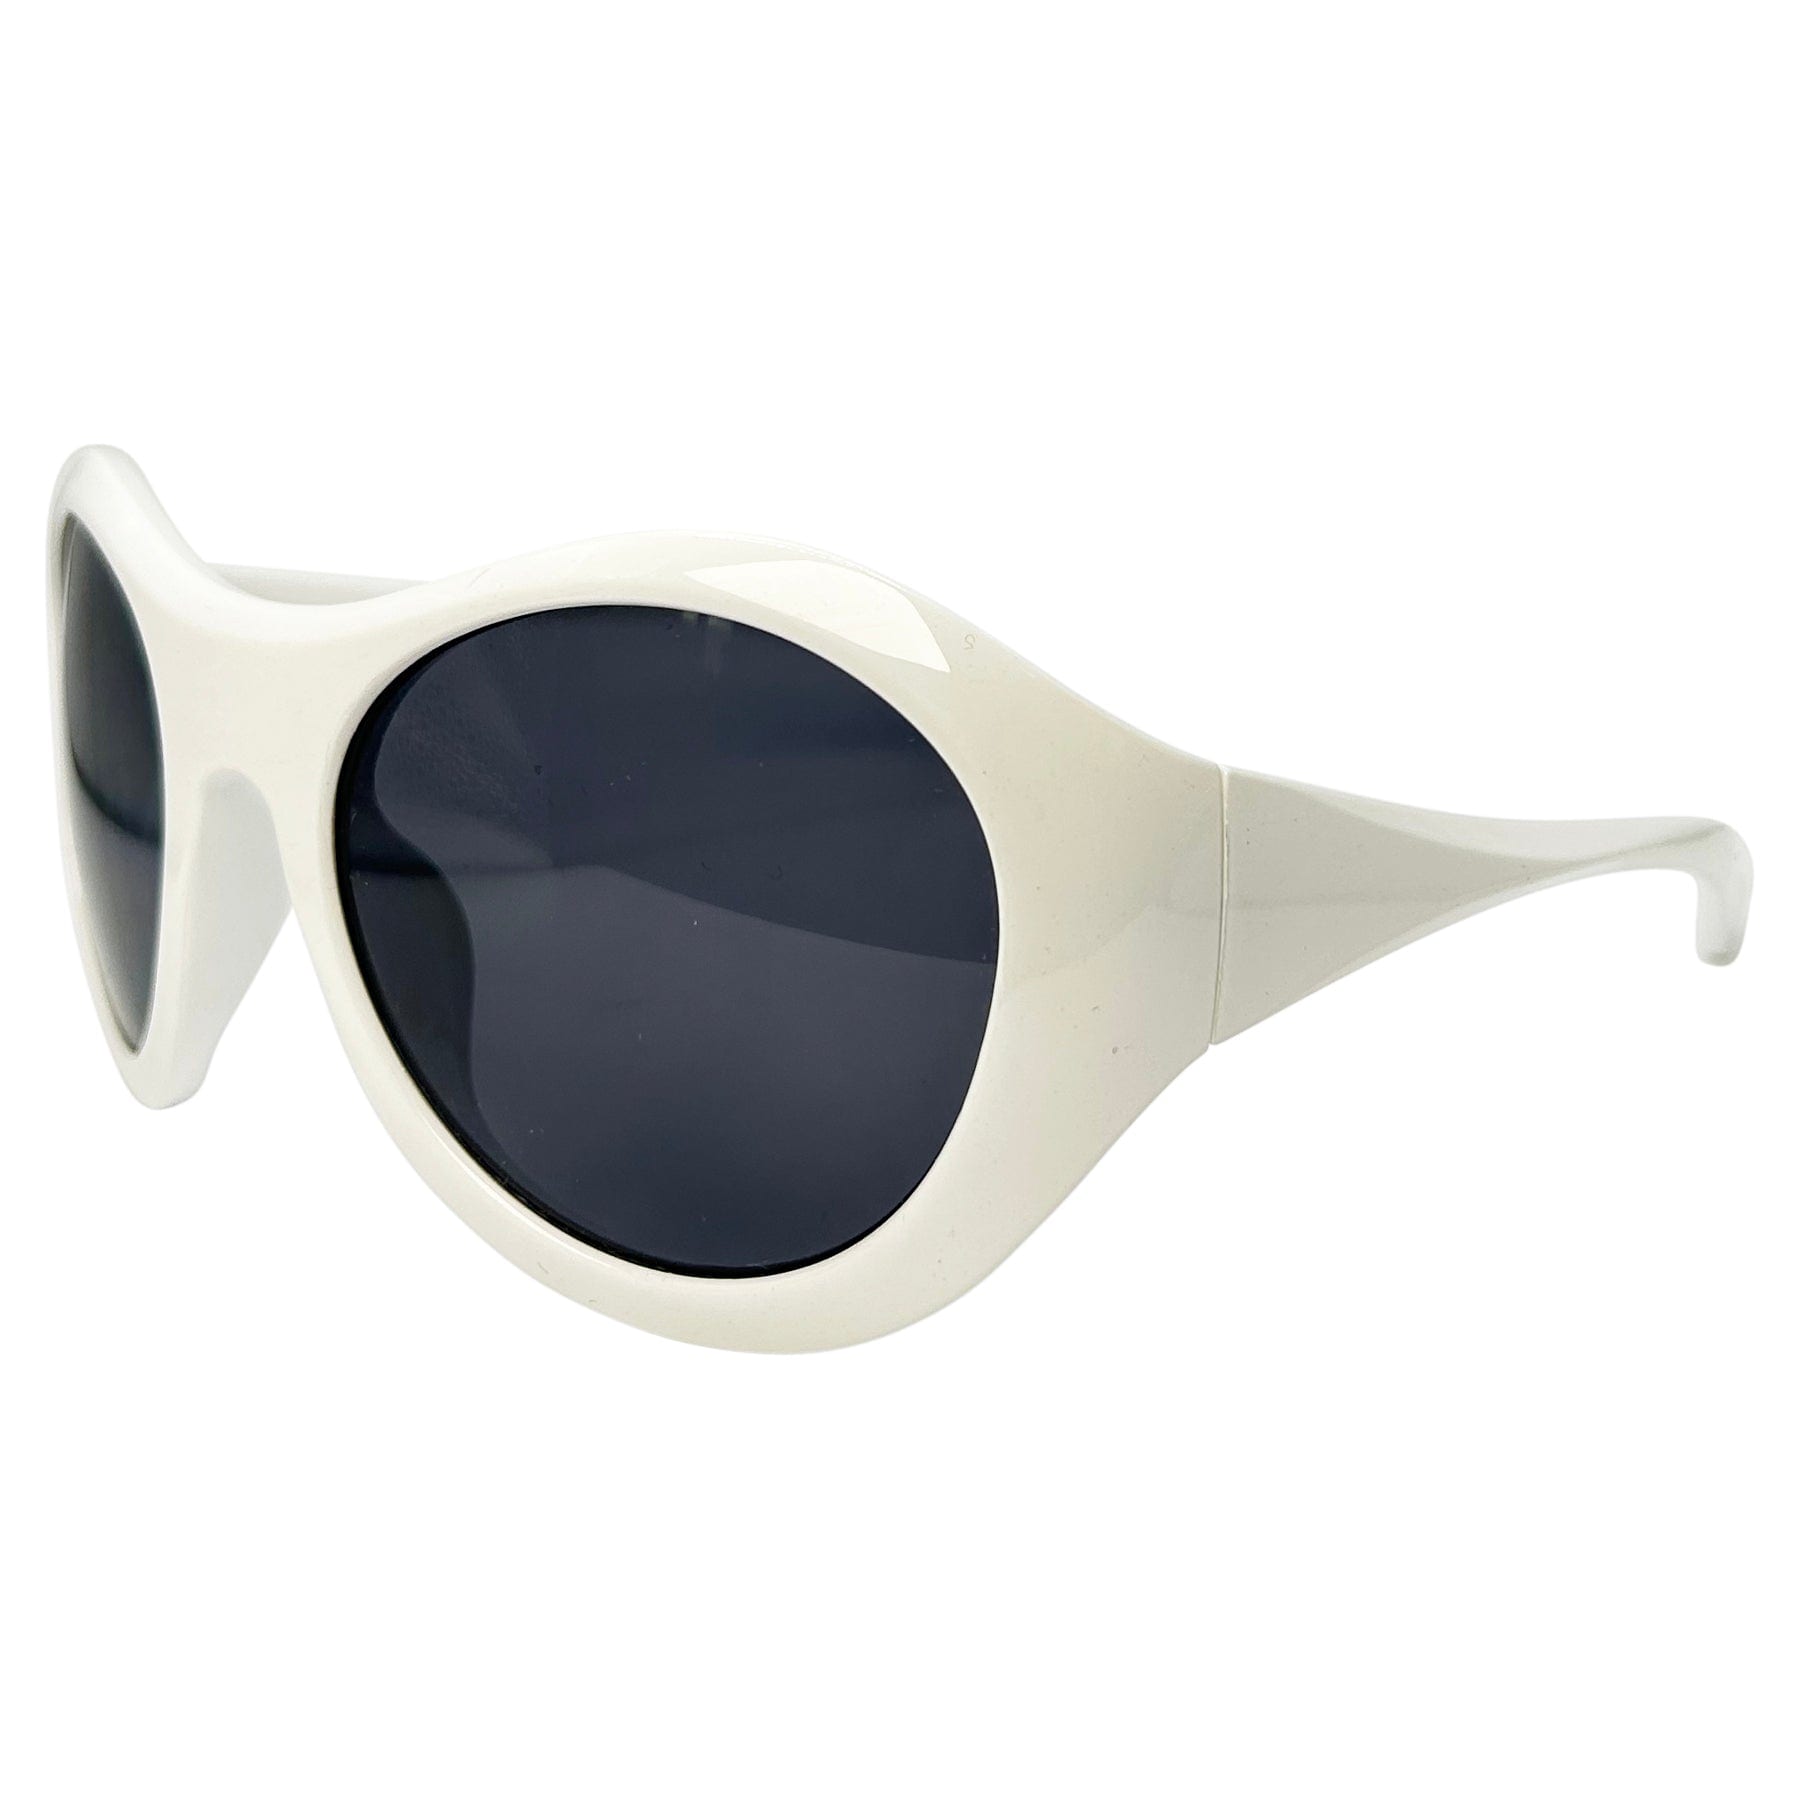 y2k oversized sunglasses women with a boho chic style frame